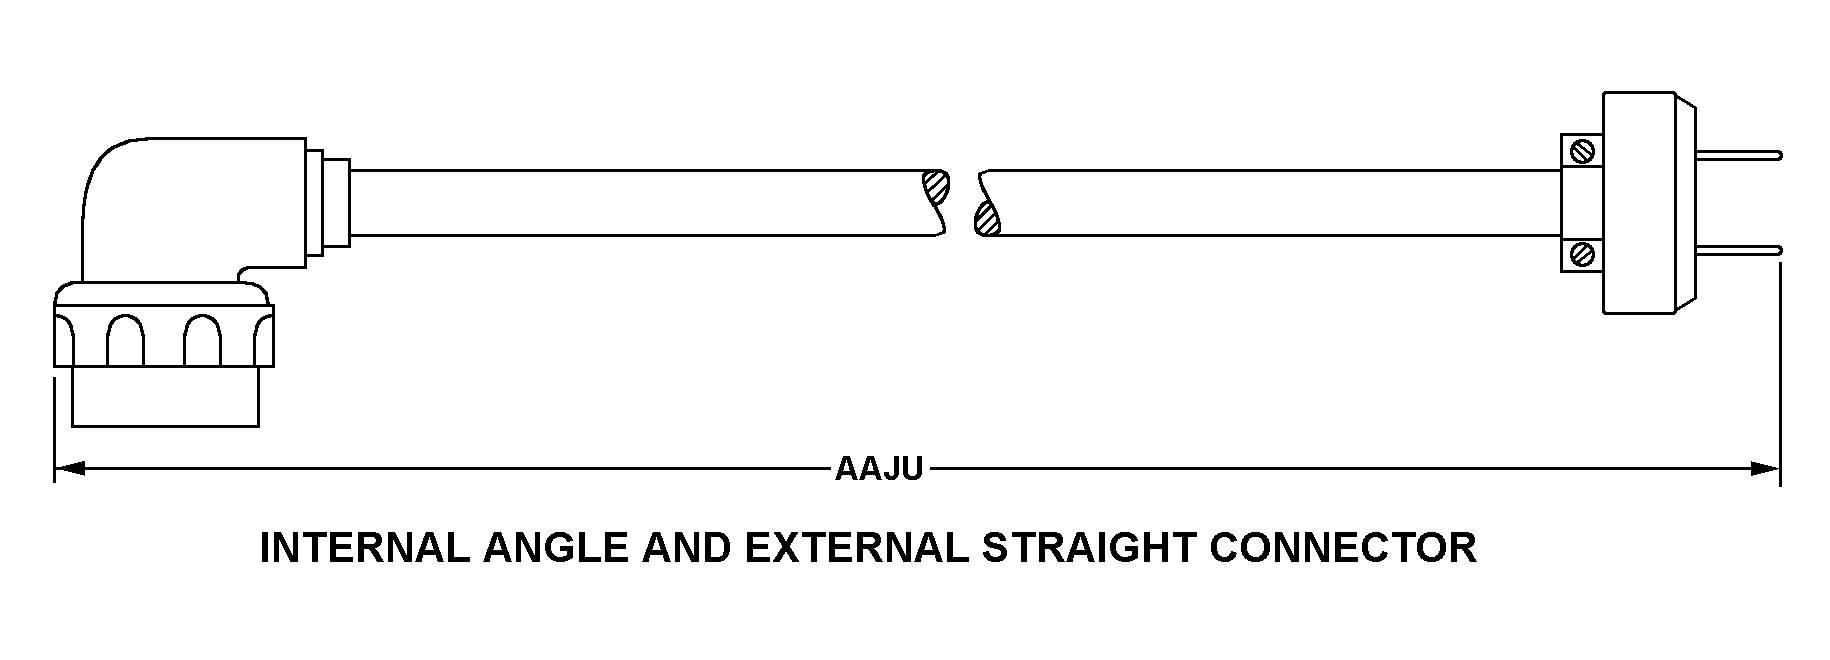 INTERNAL ANGLE AND EXTERNAL STRAIGHT CONNECTOR style nsn 5995-01-129-9172